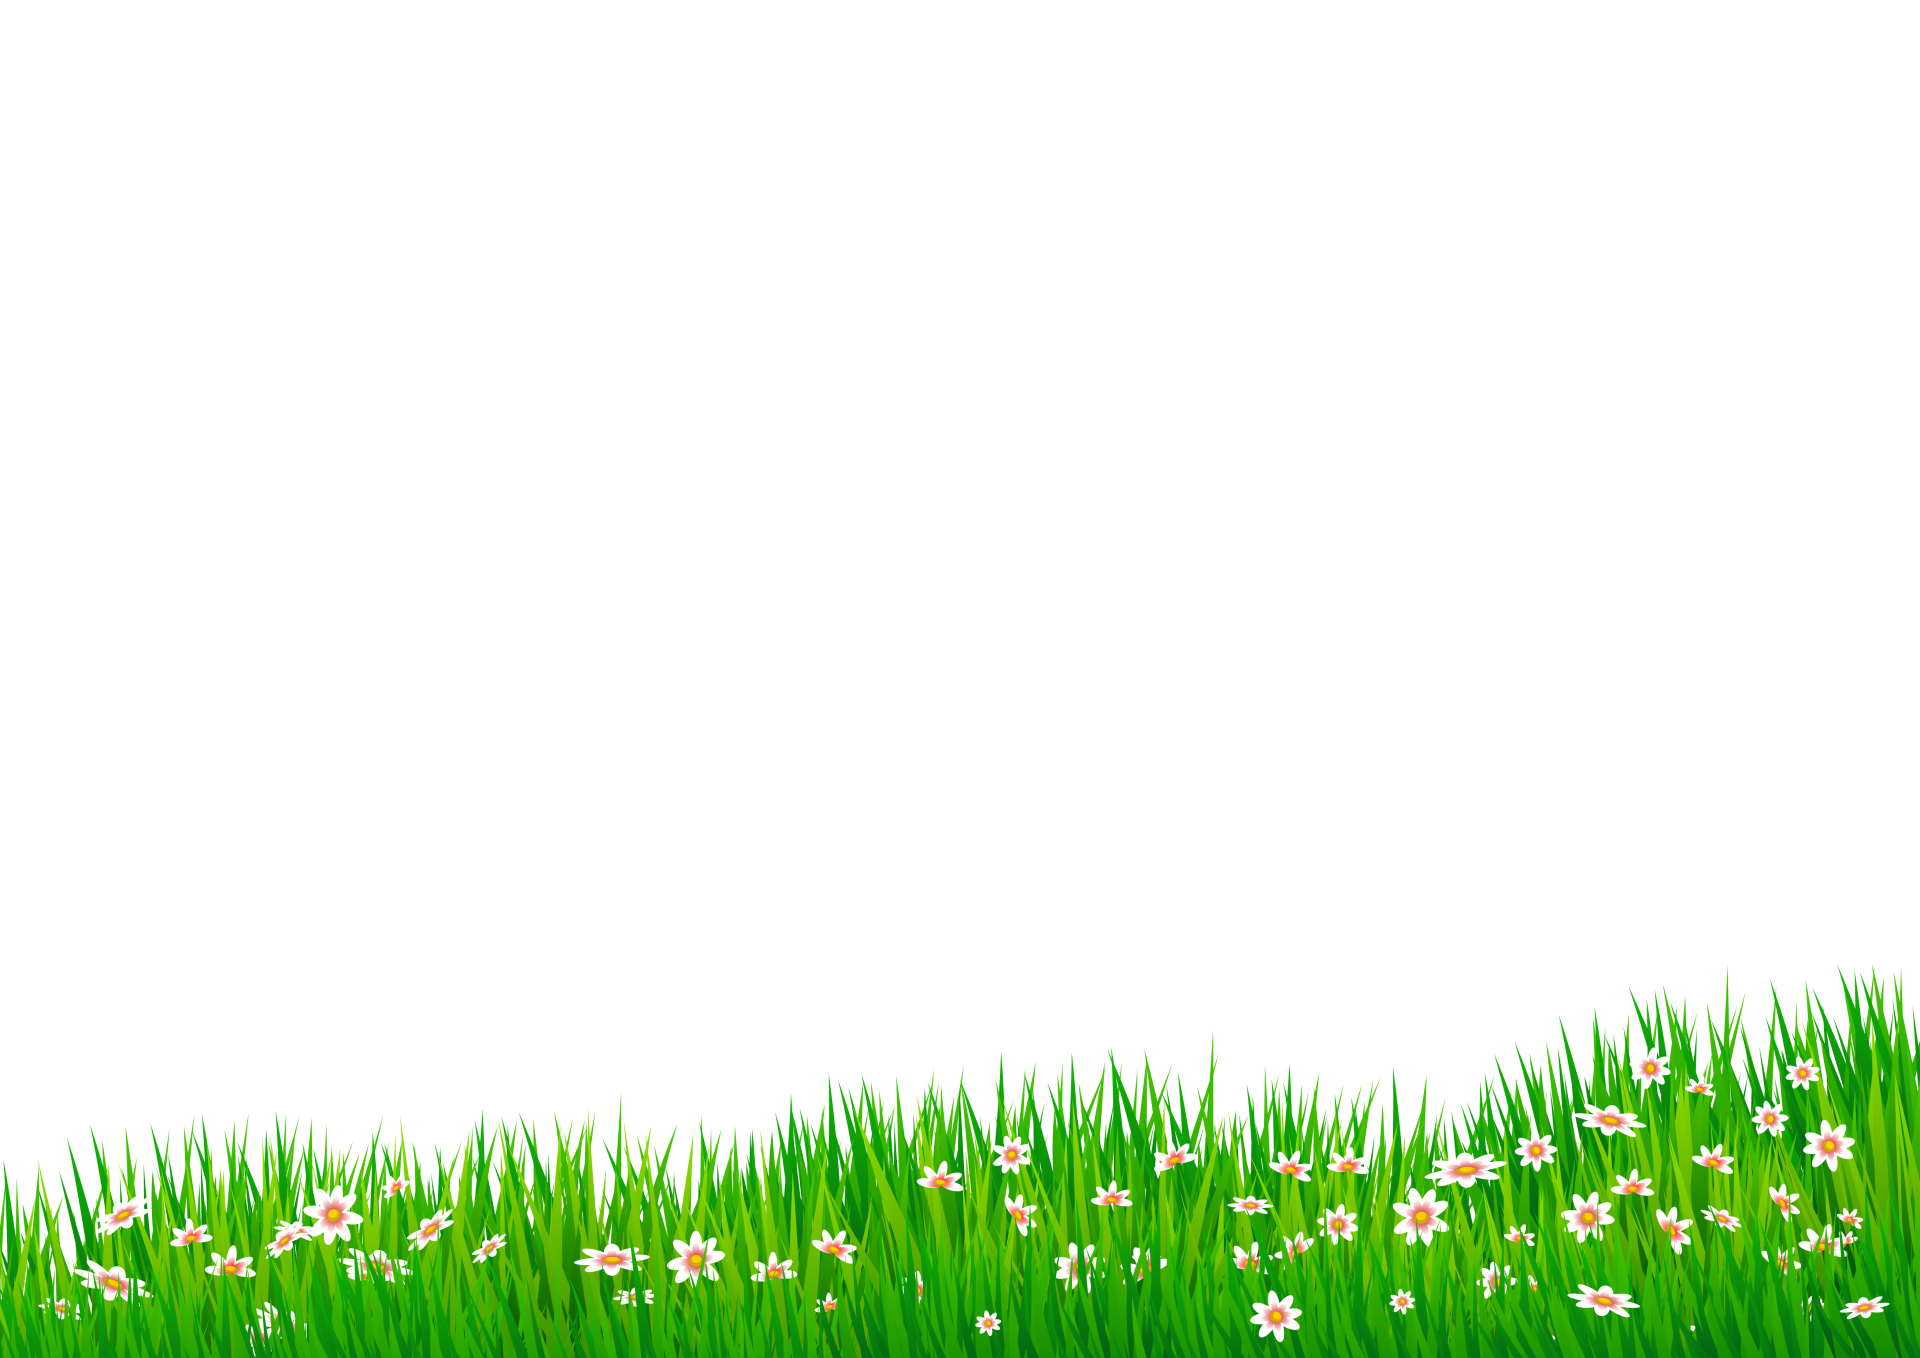 Grass Flowers Daisies Background Free Stock Photo - Public Domain Pictures